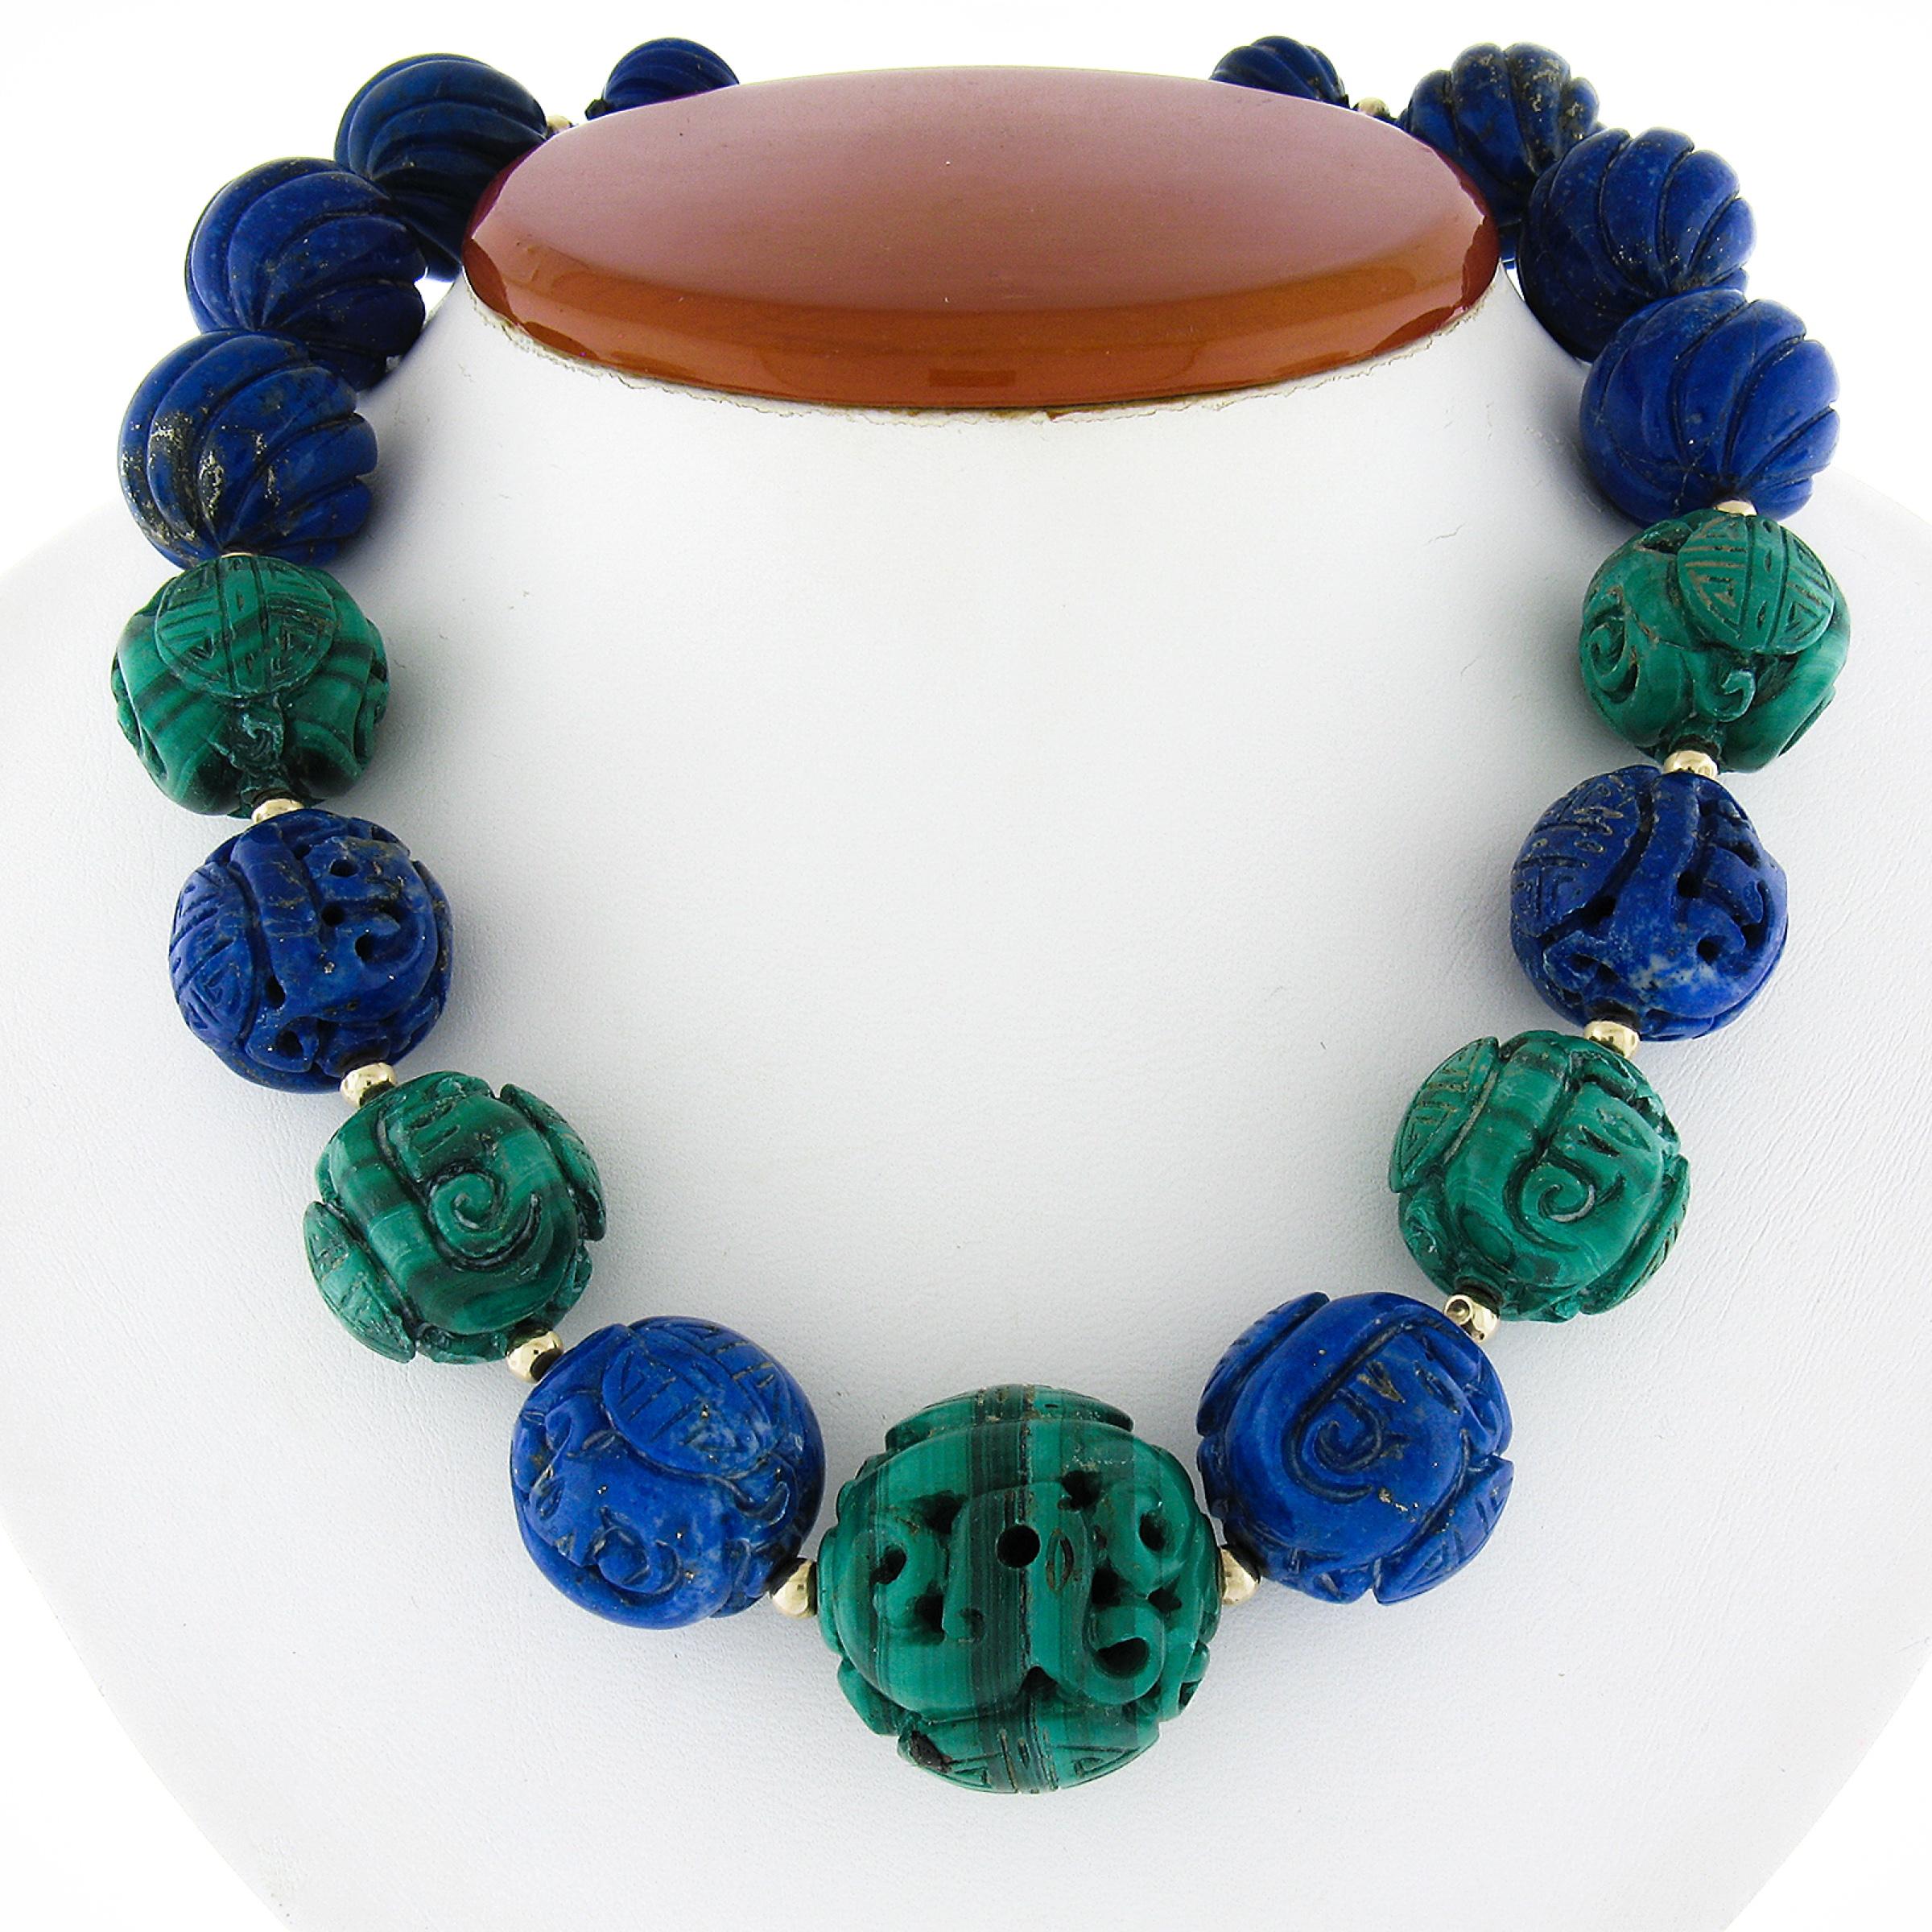 --Stone(s):--
(12) Natural Genuine Lapis Lazuli - Carved Round Bead Shape - Strung - Blue Color - 14.3 to 20.9mm each (certified)
(5) Natural Genuine Malachite - Carved Round Bead Shape - Strung - Banded Green Color - 20 to 25.8mm